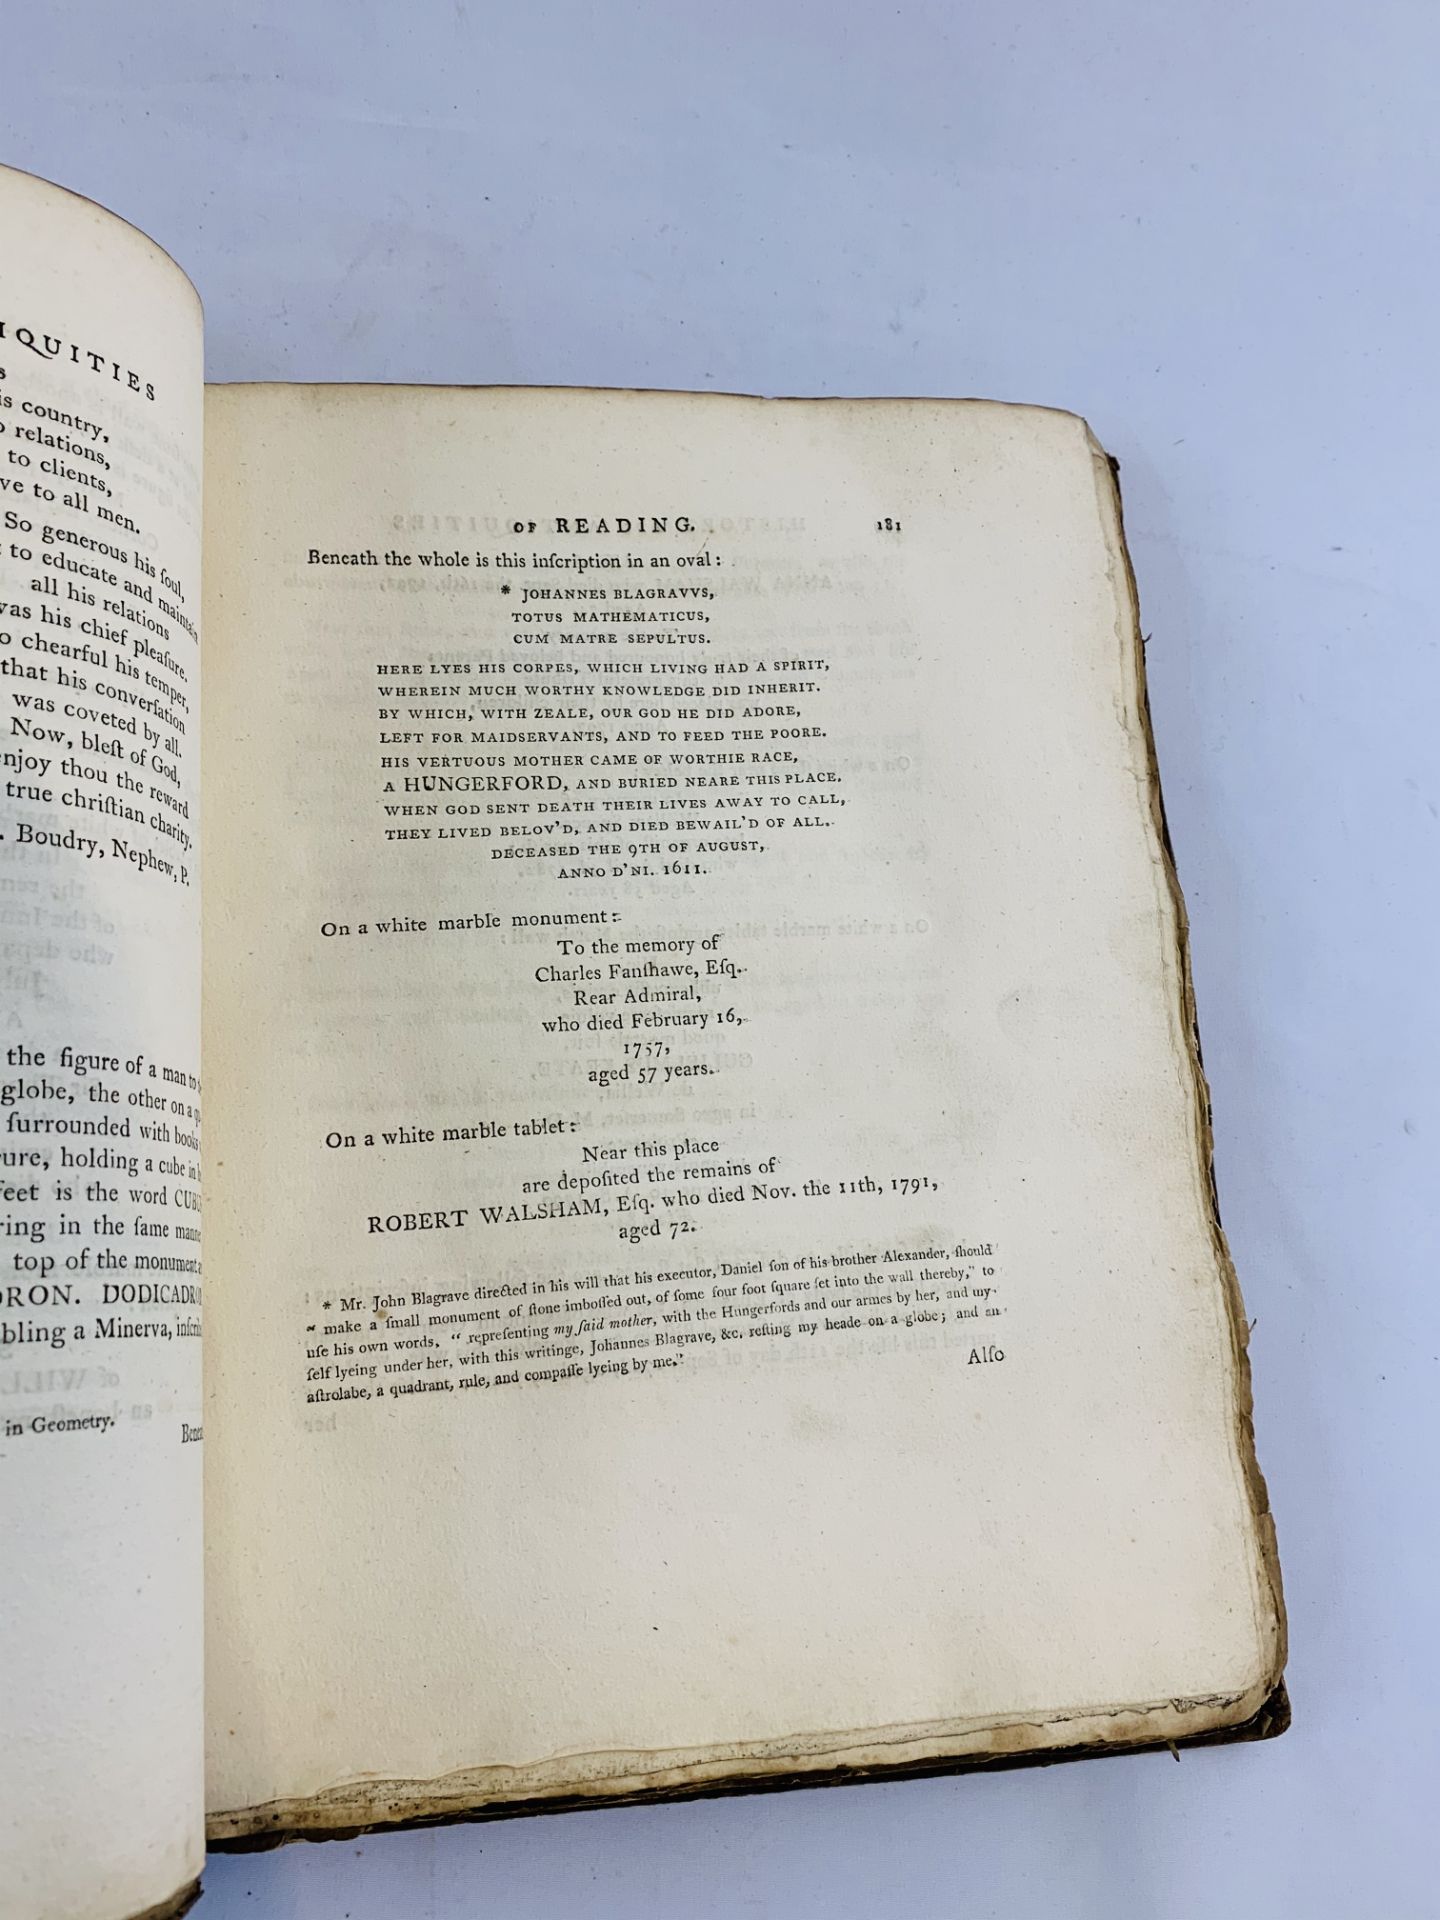 An original copy of The History and Antiquites of Reading, by Rev. Coates, published 1802 - Image 4 of 5